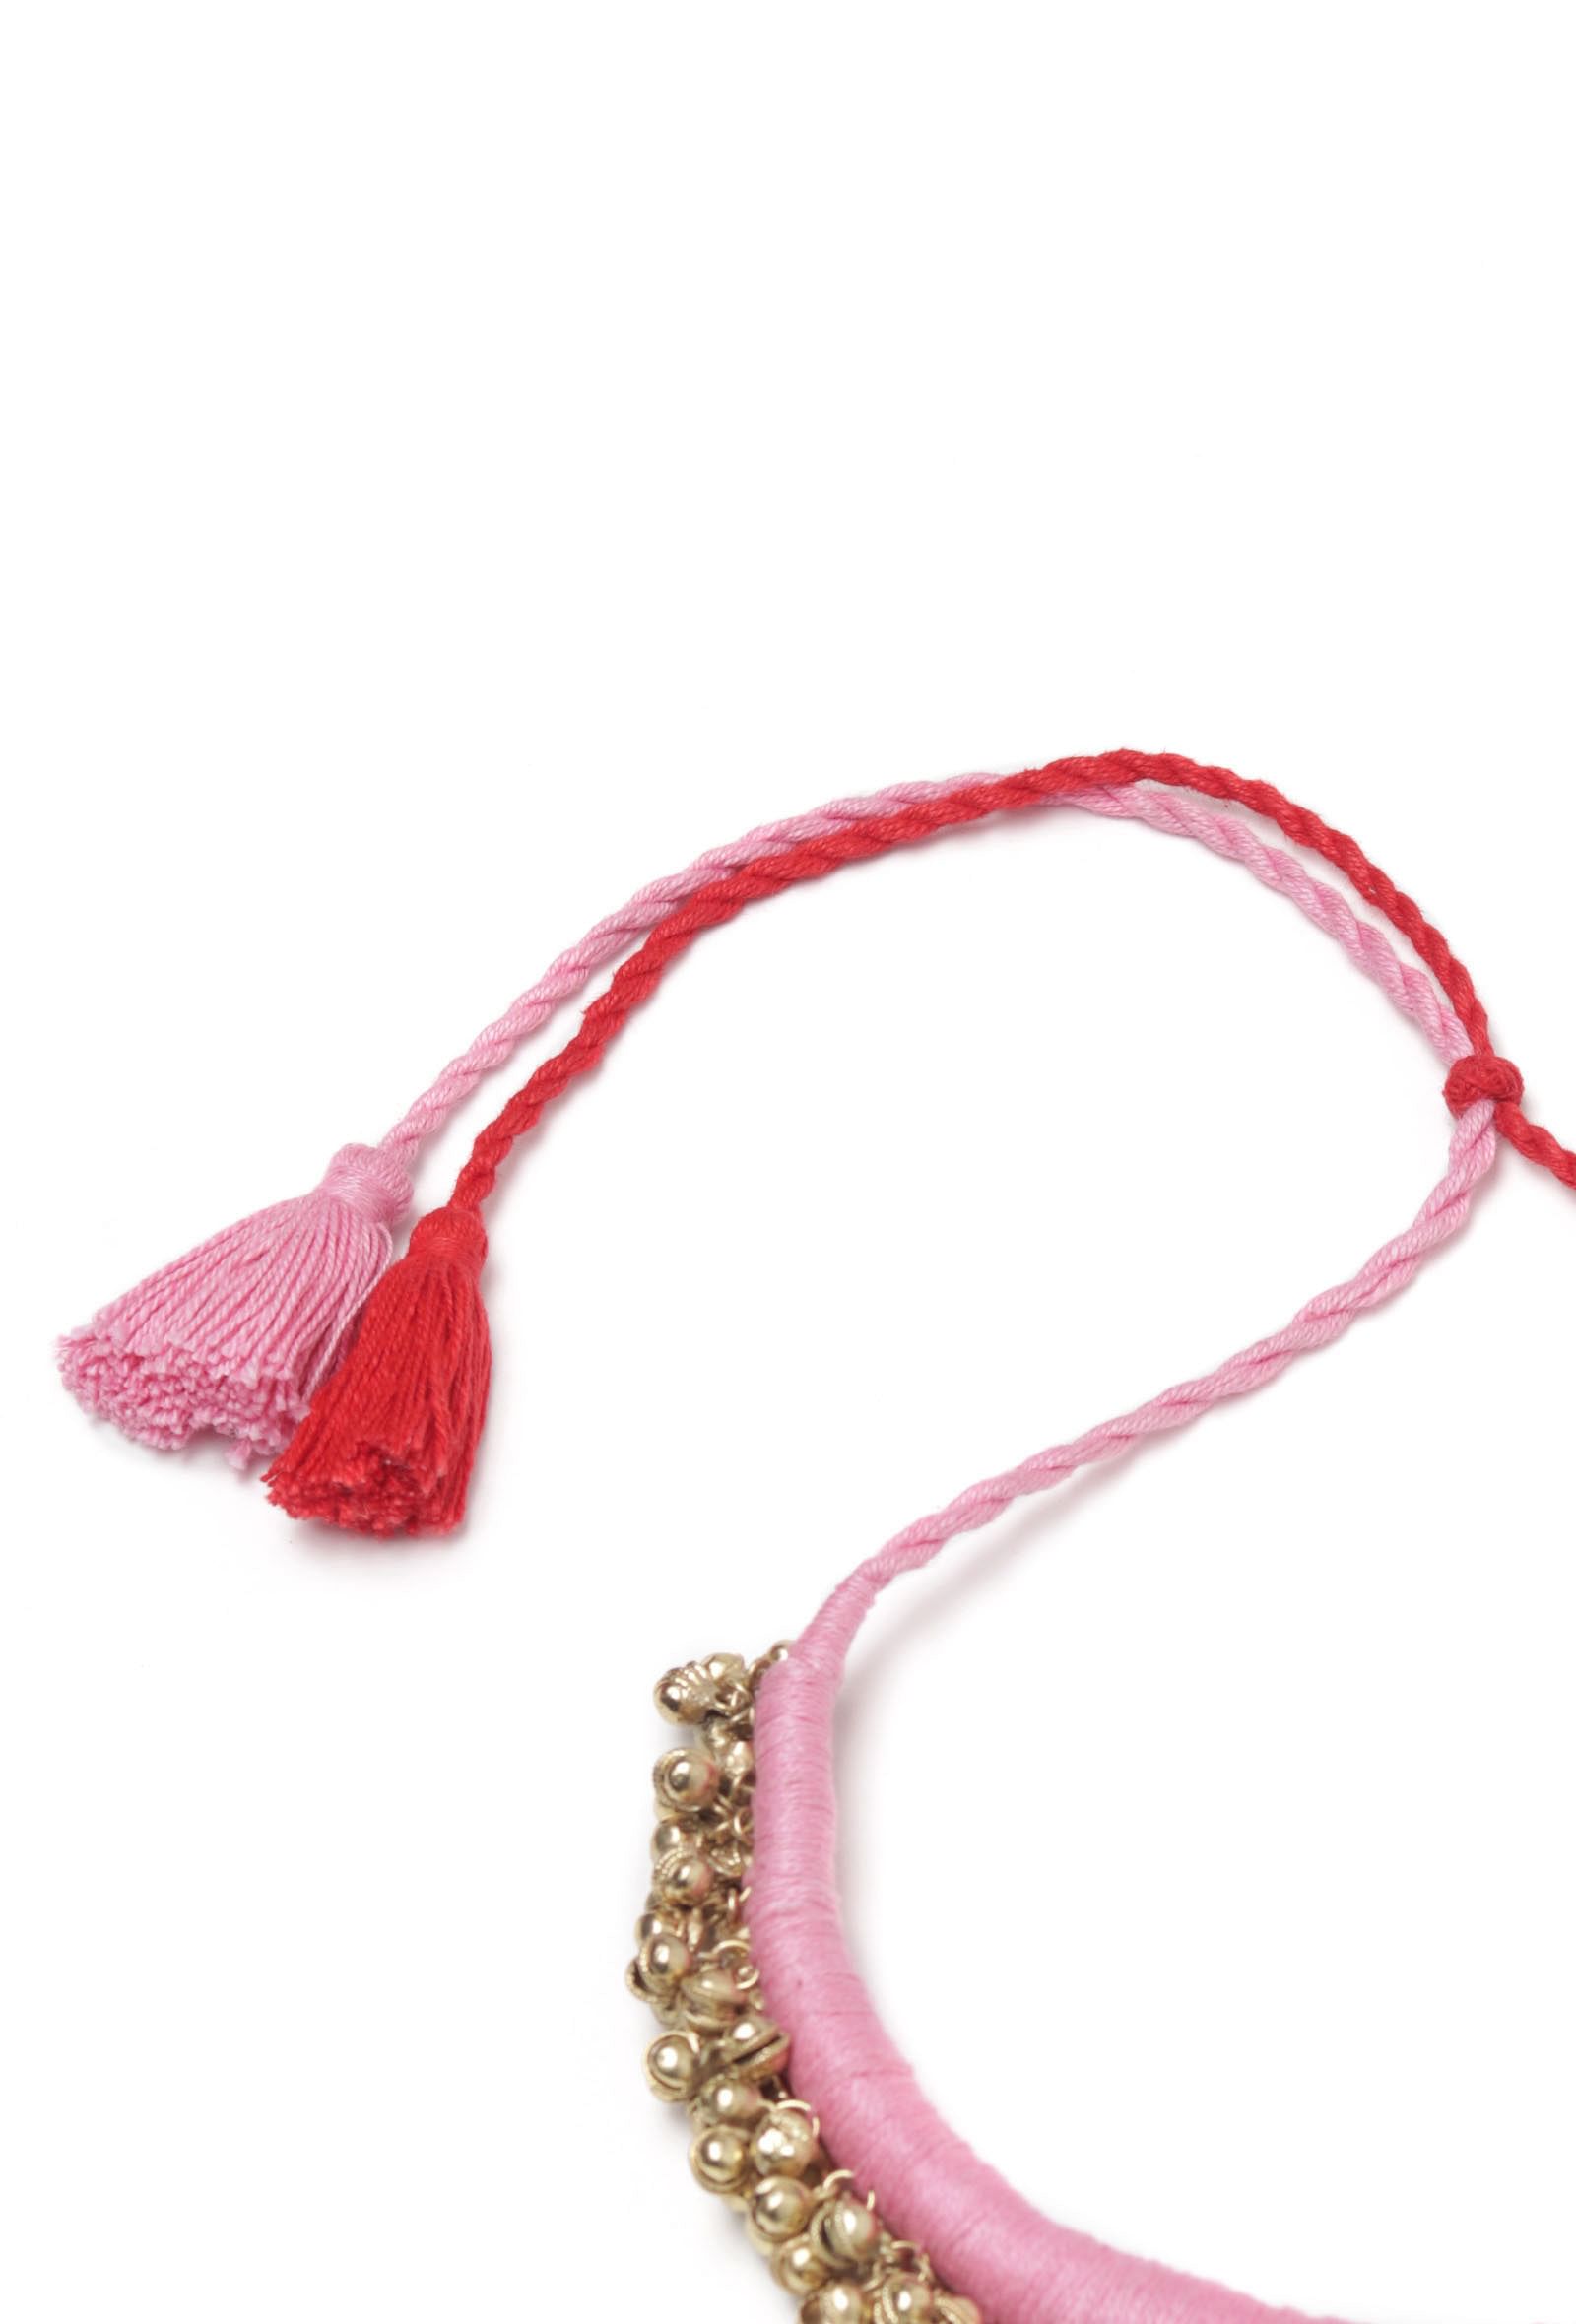 Lishika Duo Red and Pink Tribal Ghungroo Necklace